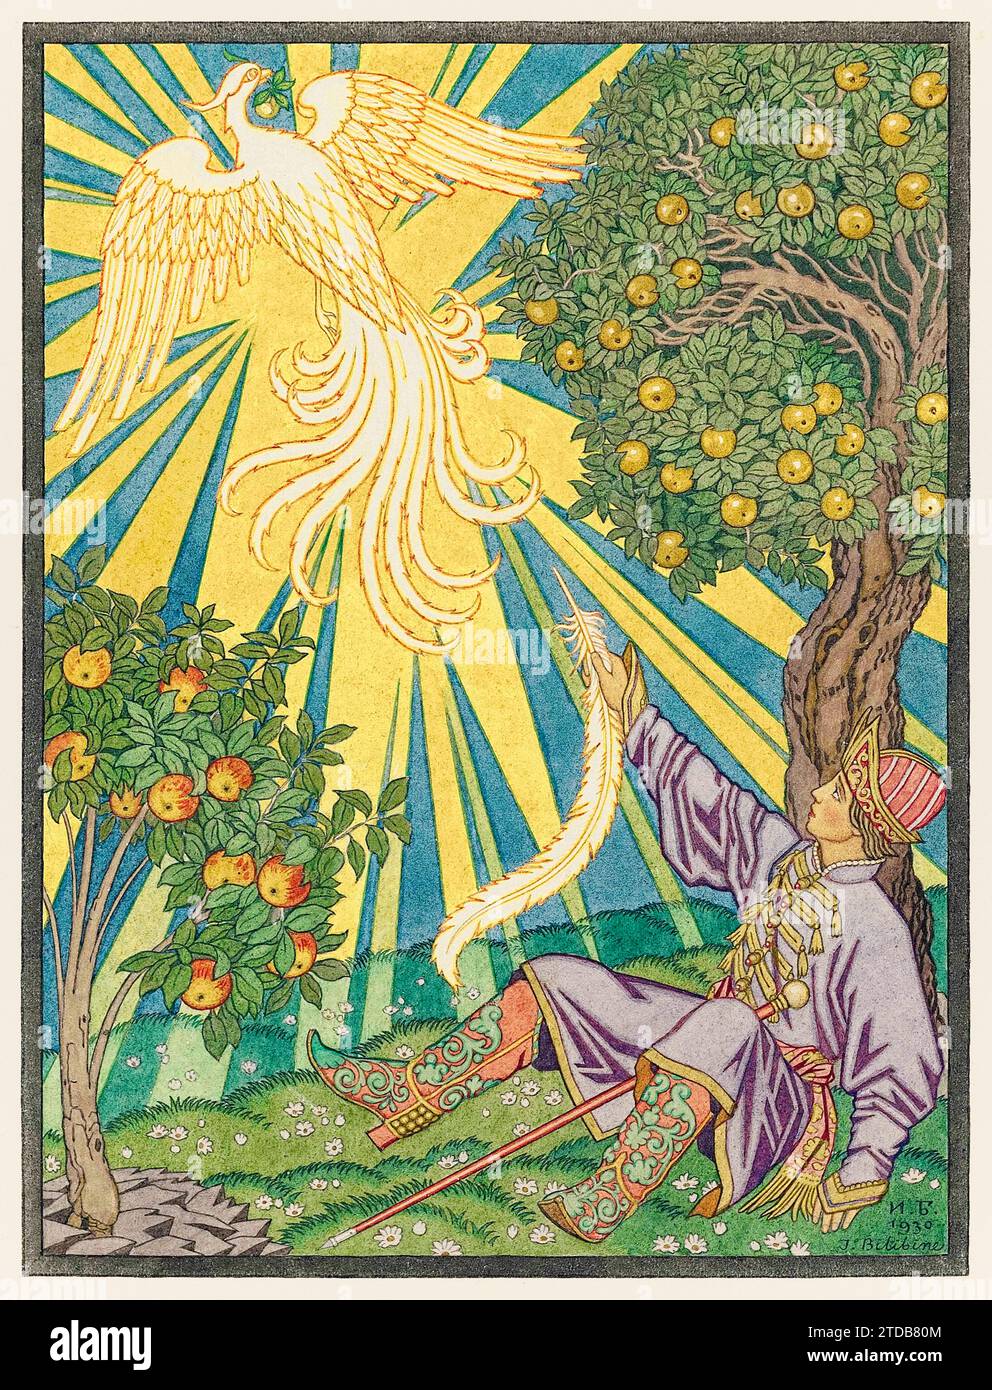 Ivan-Tsarevich and the firebird from Contes de l'isba by H. Isserlis and B. Auroyet published in 1931, illustration by Ivan Bilibine (1876-1942) showing Prince Ivan a Russian folk catching the firebird’s feather. Stock Photo